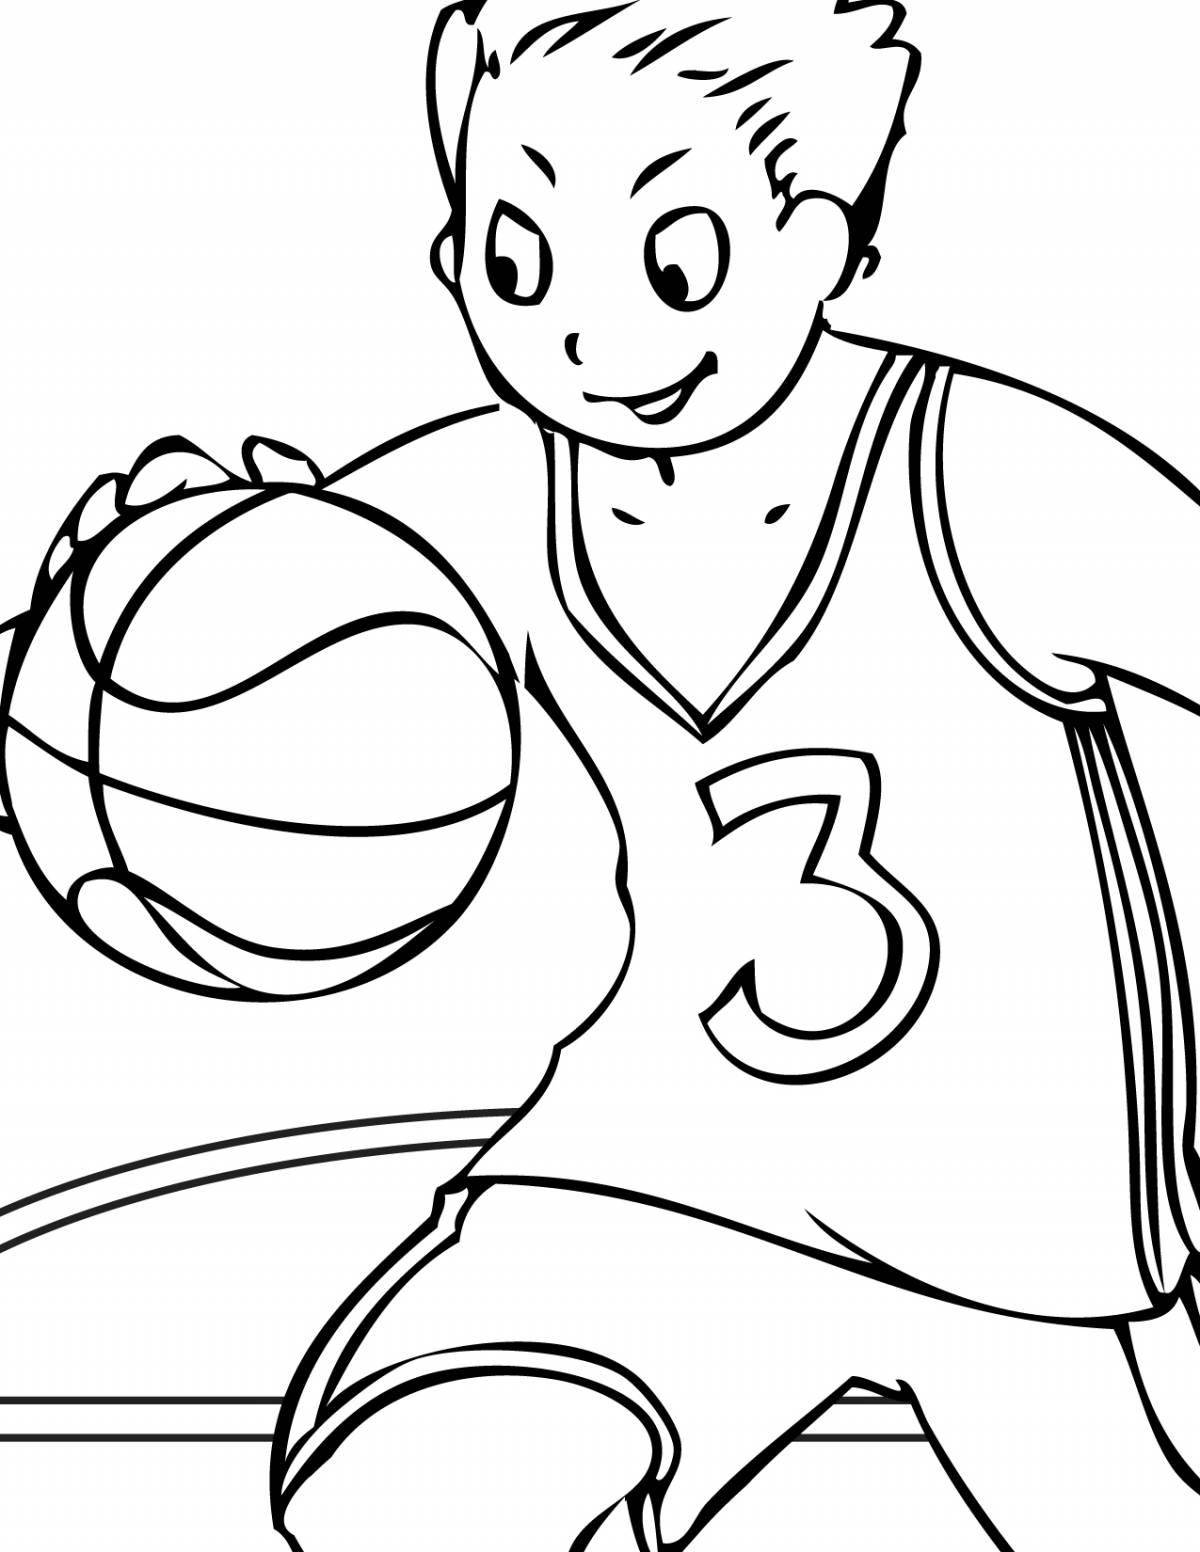 Glowing athletes coloring pages for kids